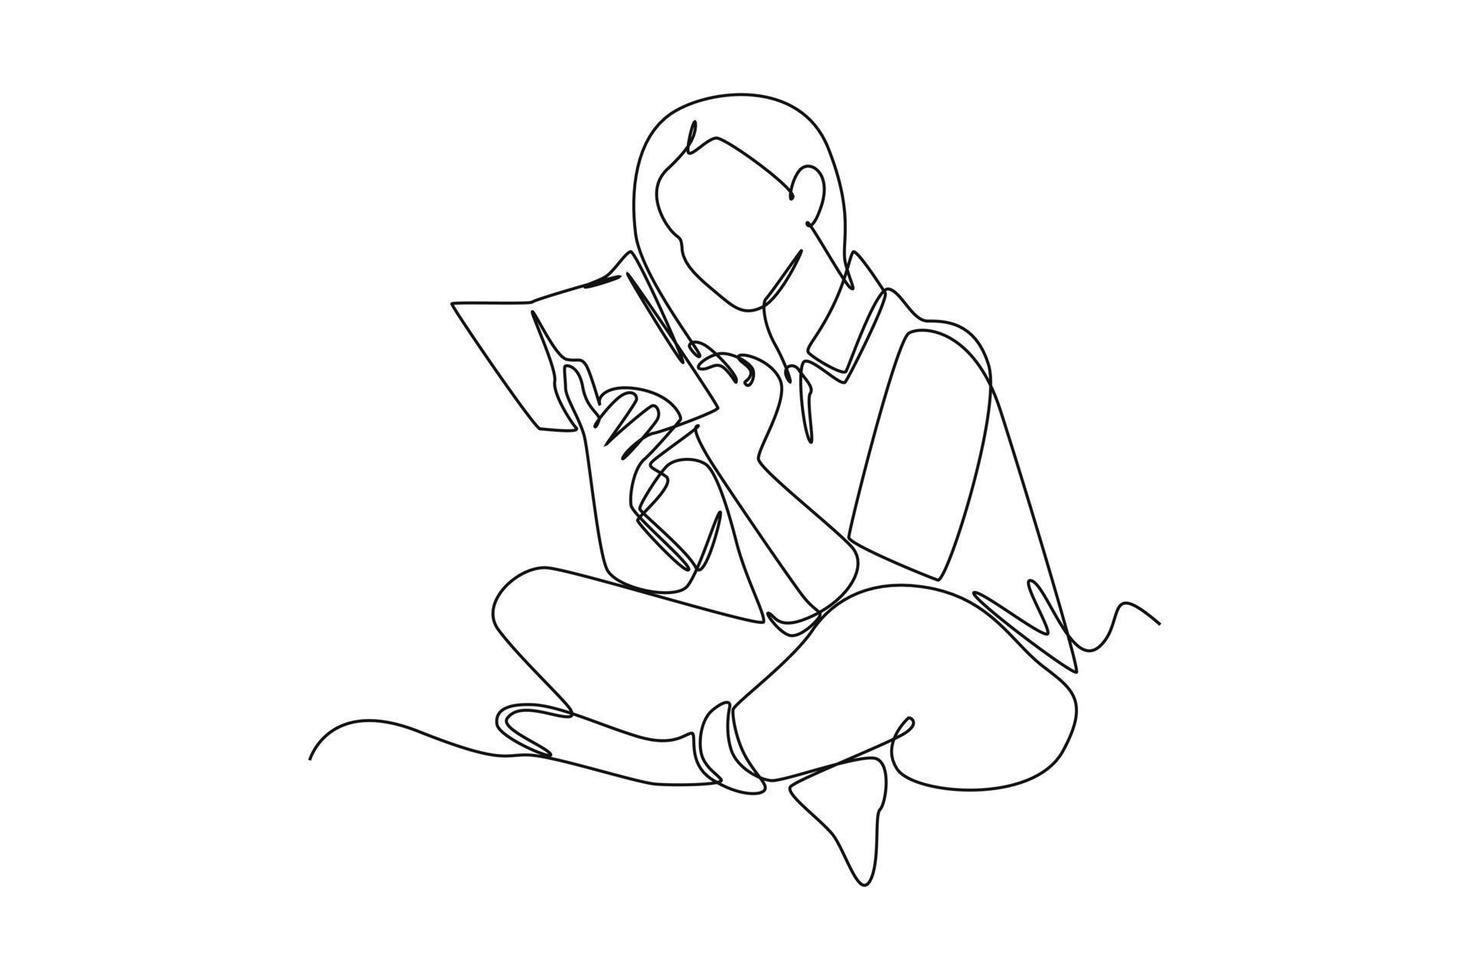 Single one line drawing happy woman reading book. World book day concept. Continuous line draw design graphic vector illustration.